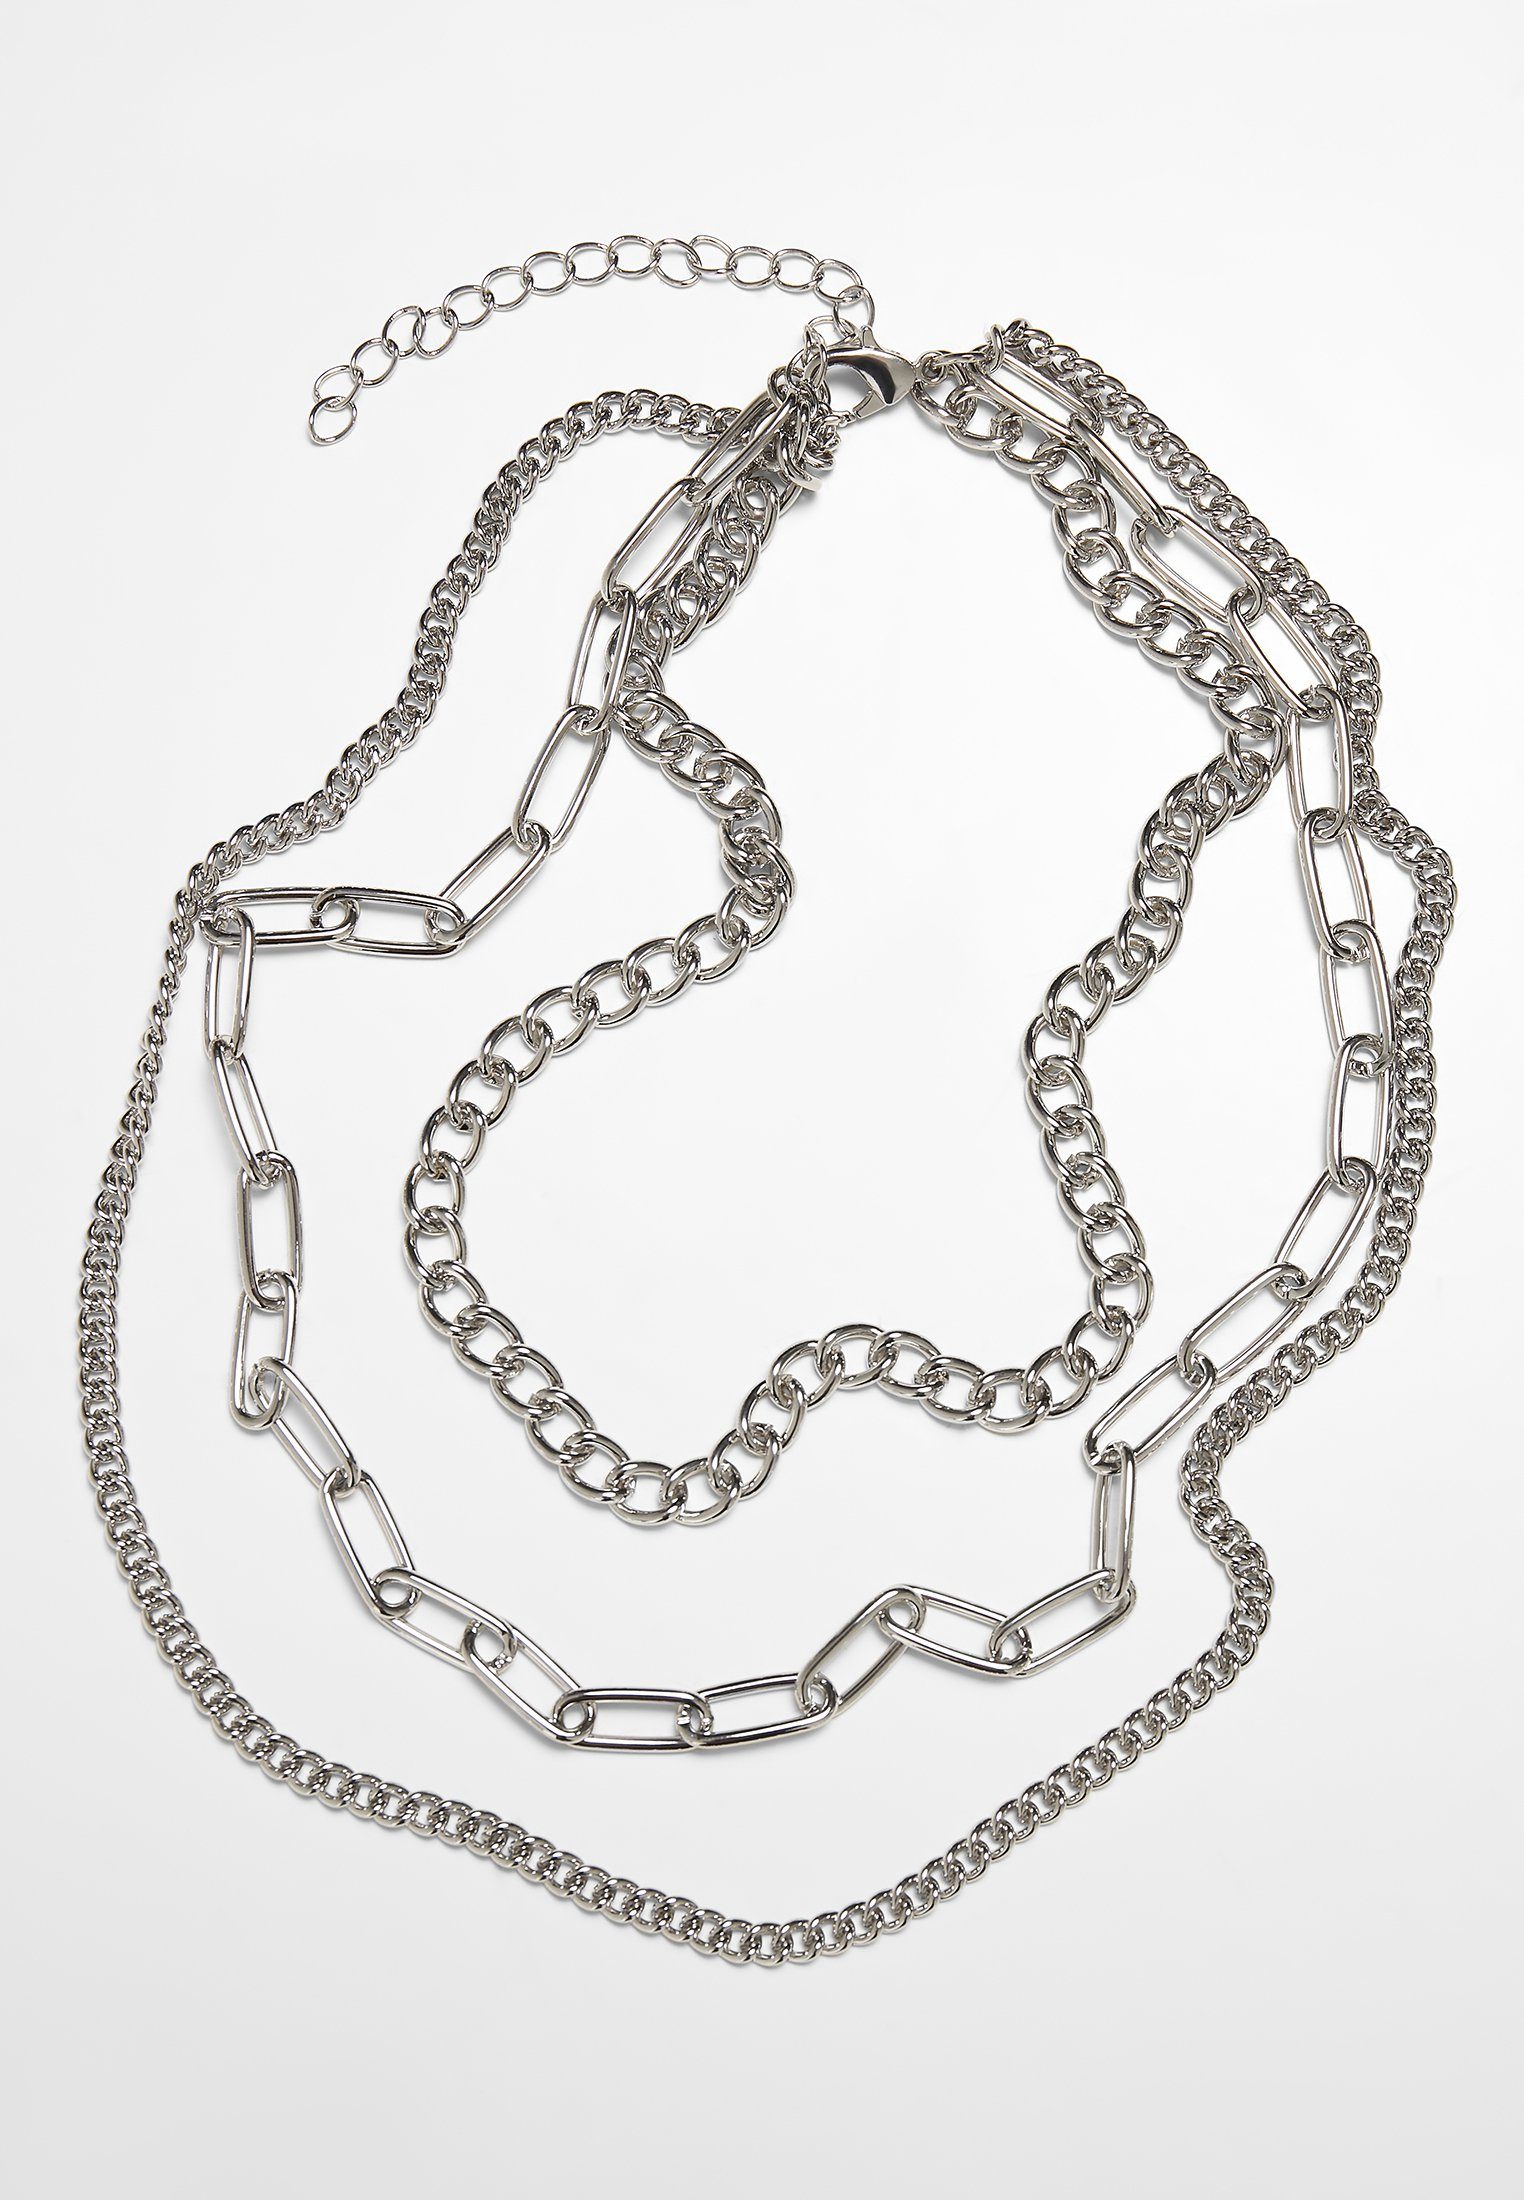 URBAN Edelstahlkette Necklace silver Layering Chain CLASSICS Accessoires